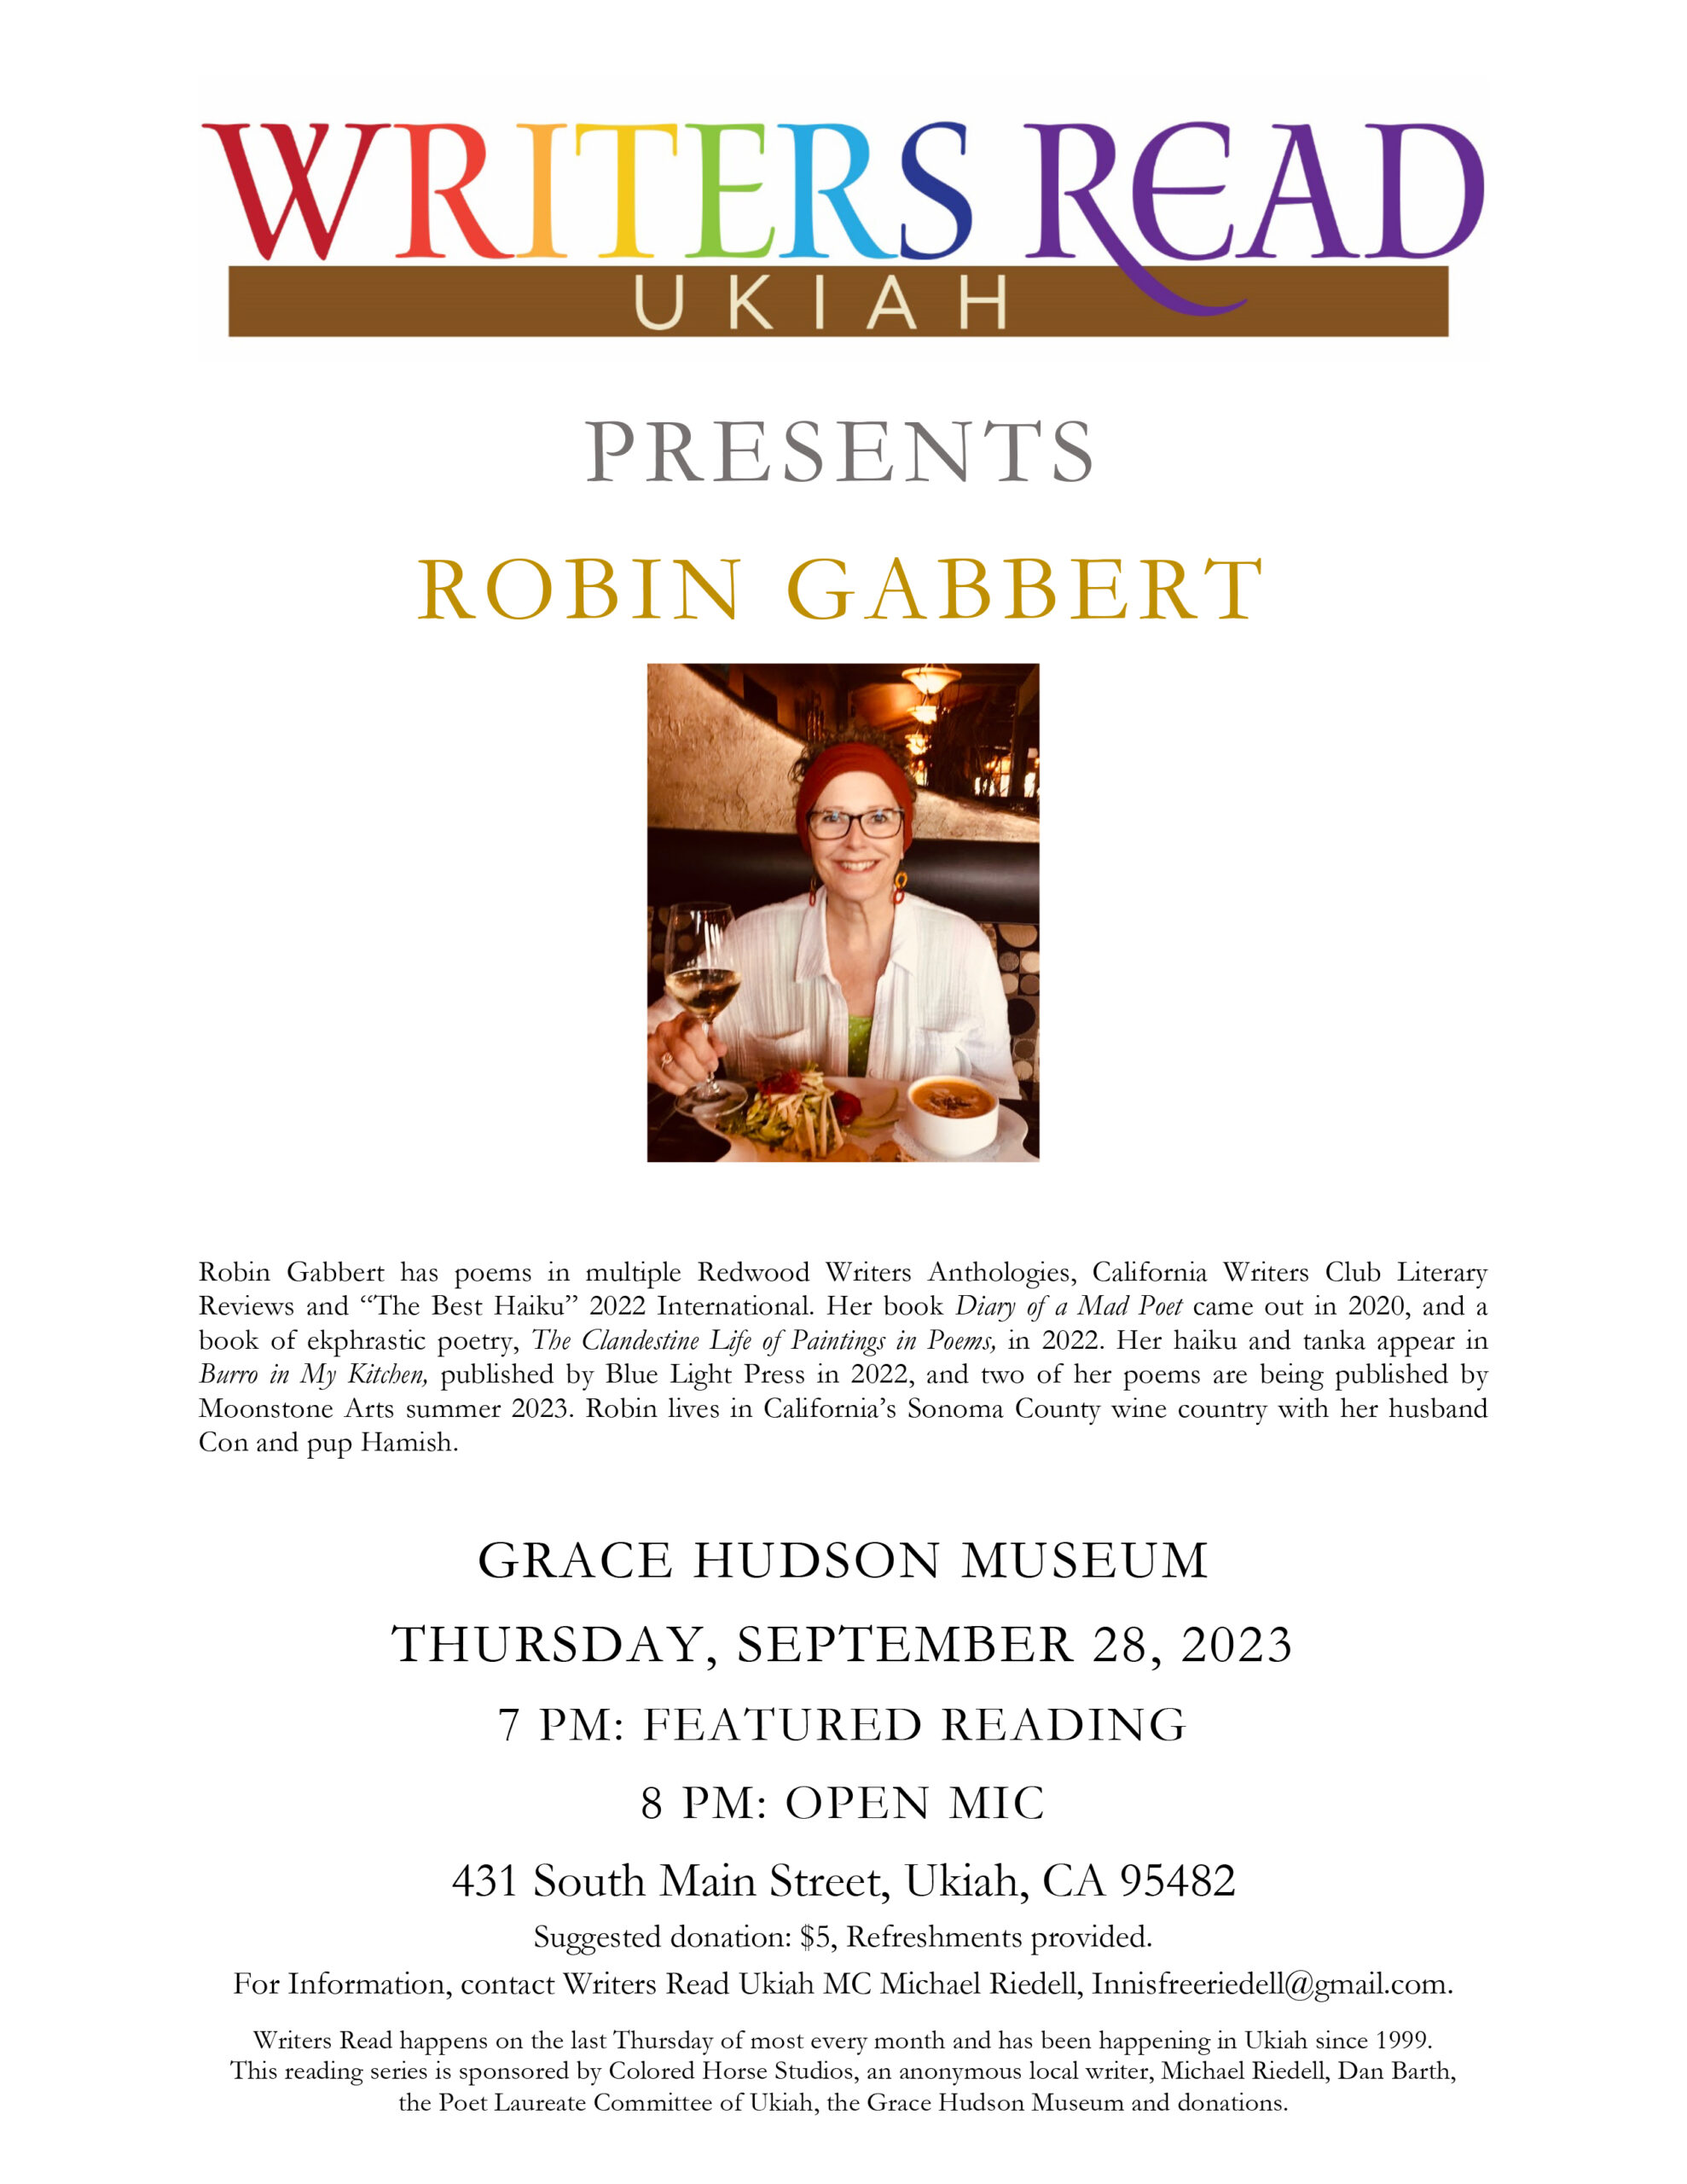 Robin Gabbert, featured reader for Writers Read on 09/28/23